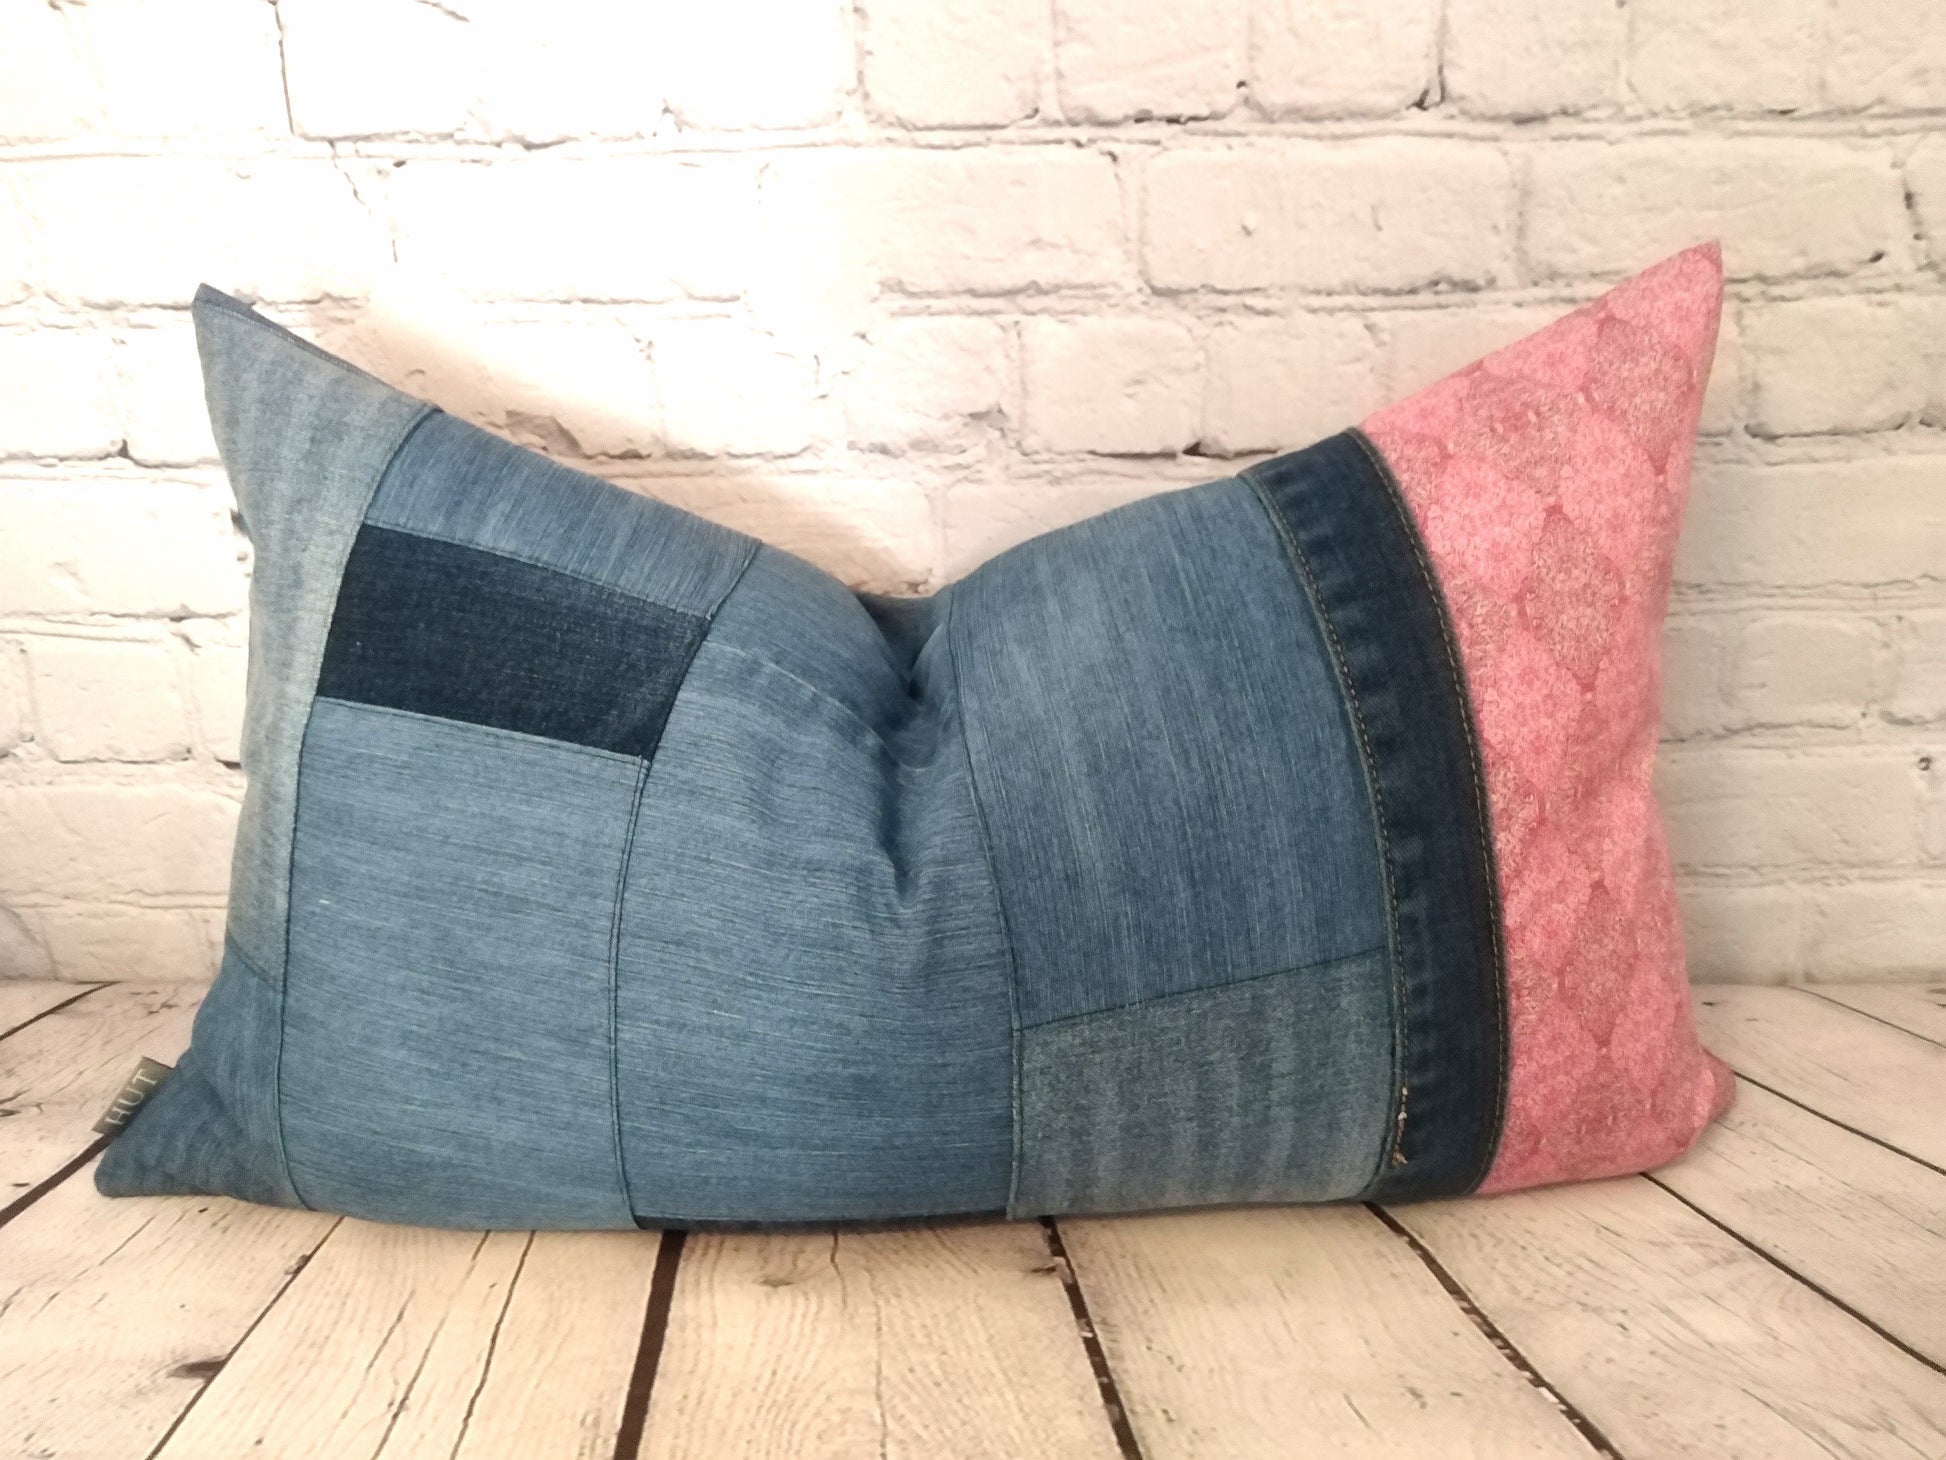 Handmade patchwork denim and pink Liberty fabric bolster cushion with feather inner pad.